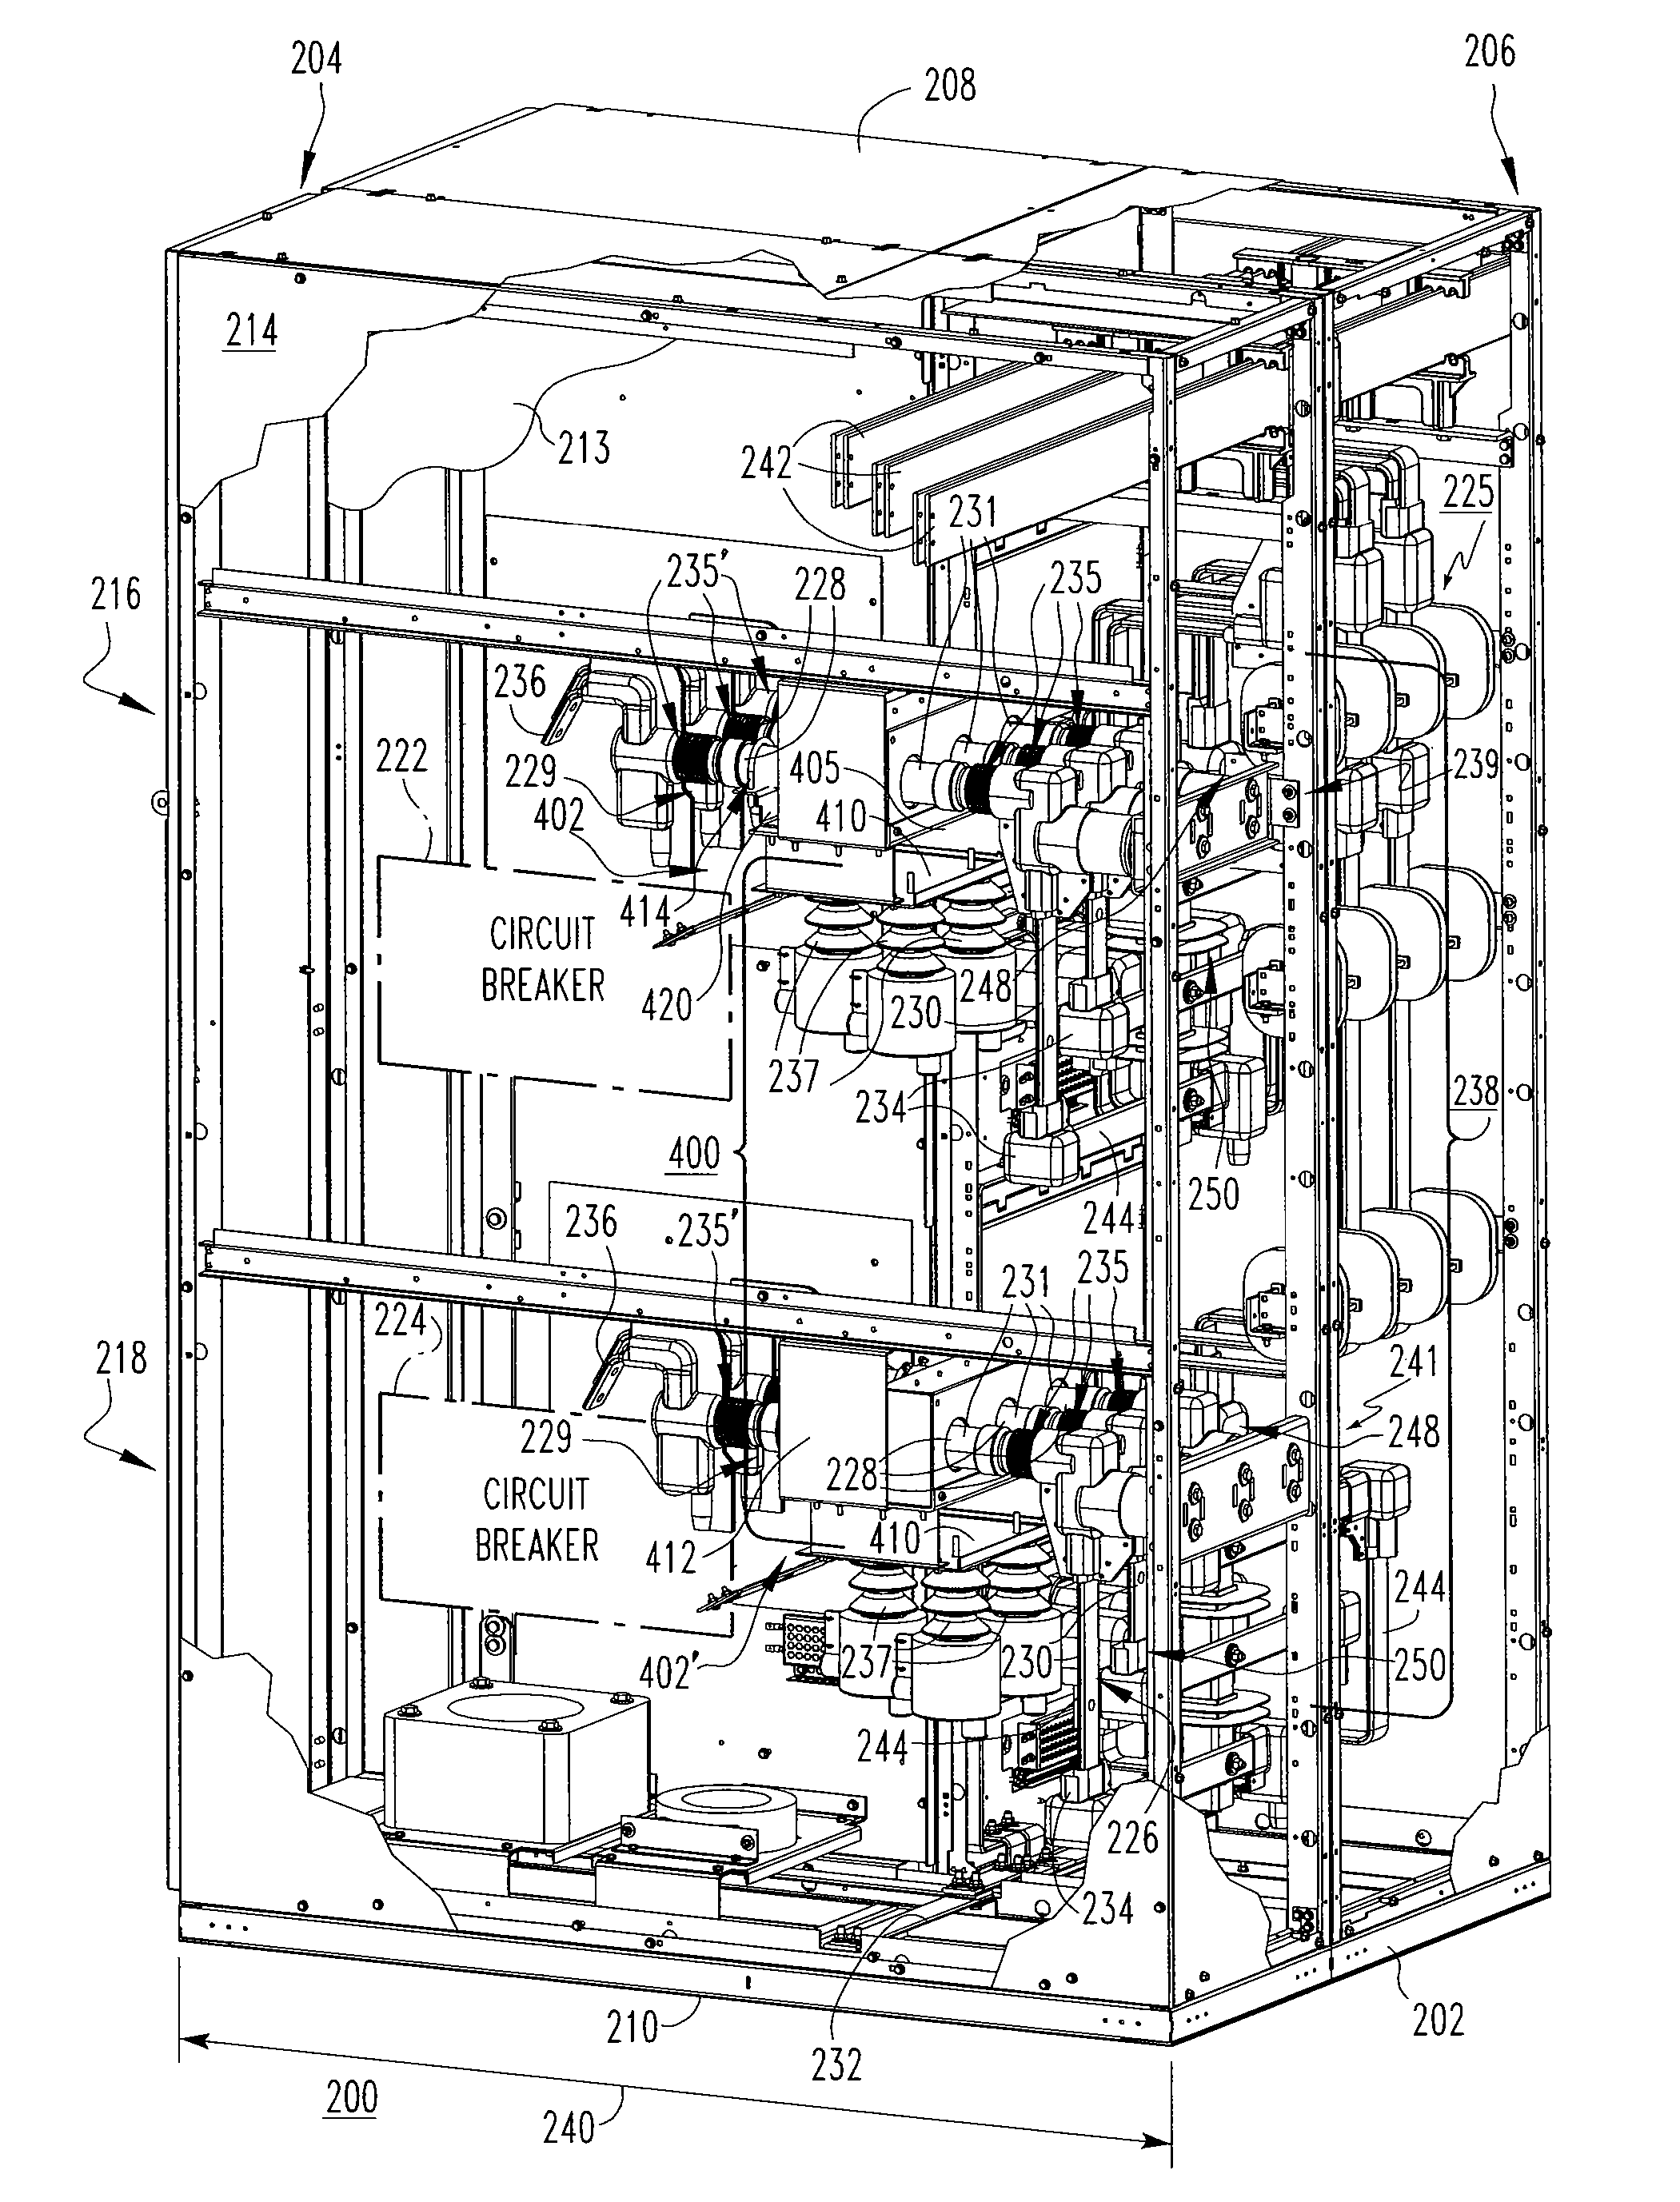 Electrical bus member mounting system and electrical enclosure employing the same